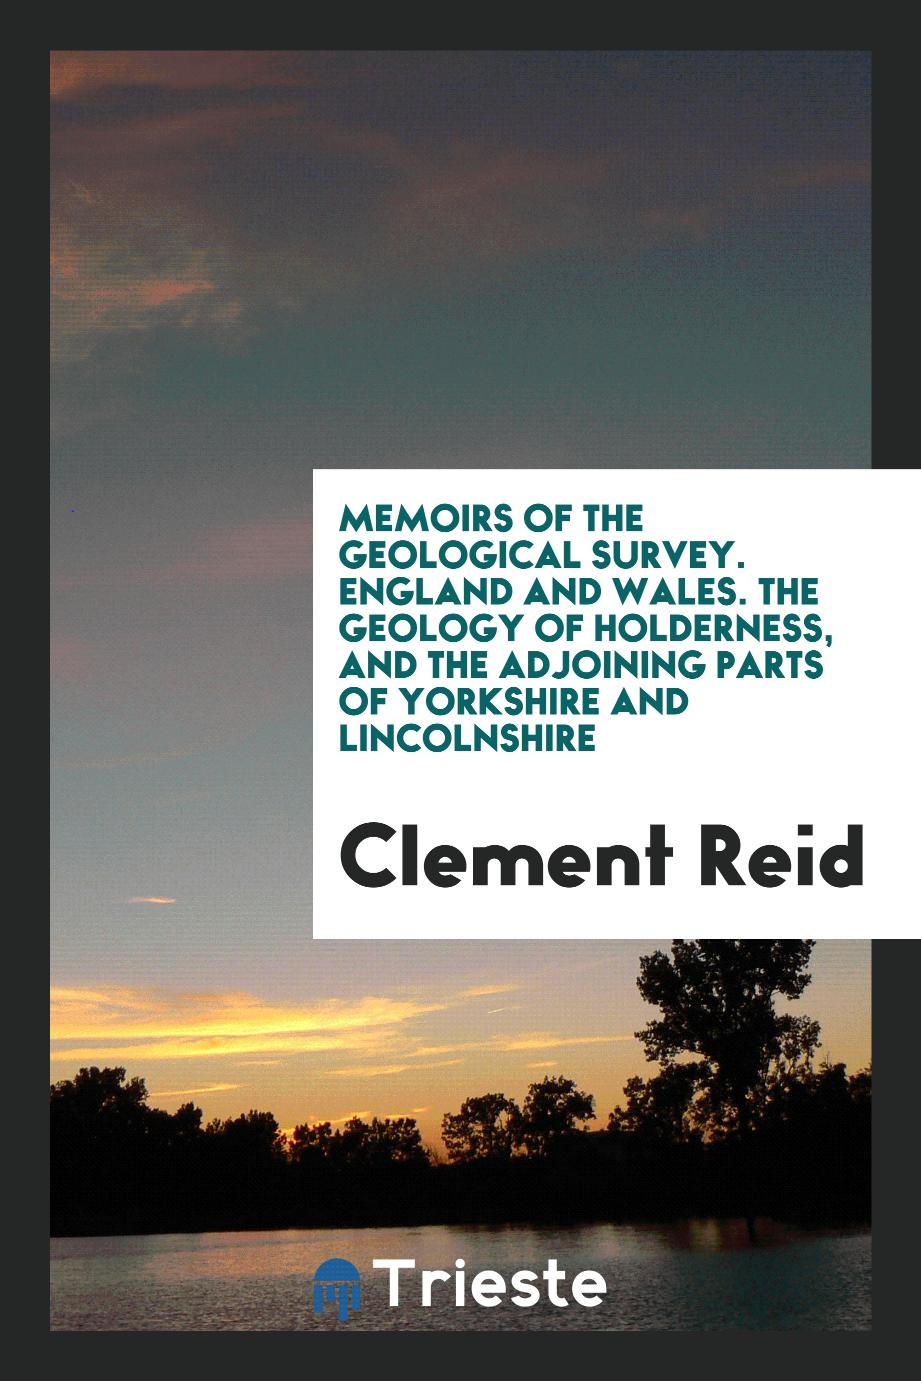 Memoirs of the Geological Survey. England and Wales. The Geology of Holderness, and the Adjoining Parts of Yorkshire and Lincolnshire